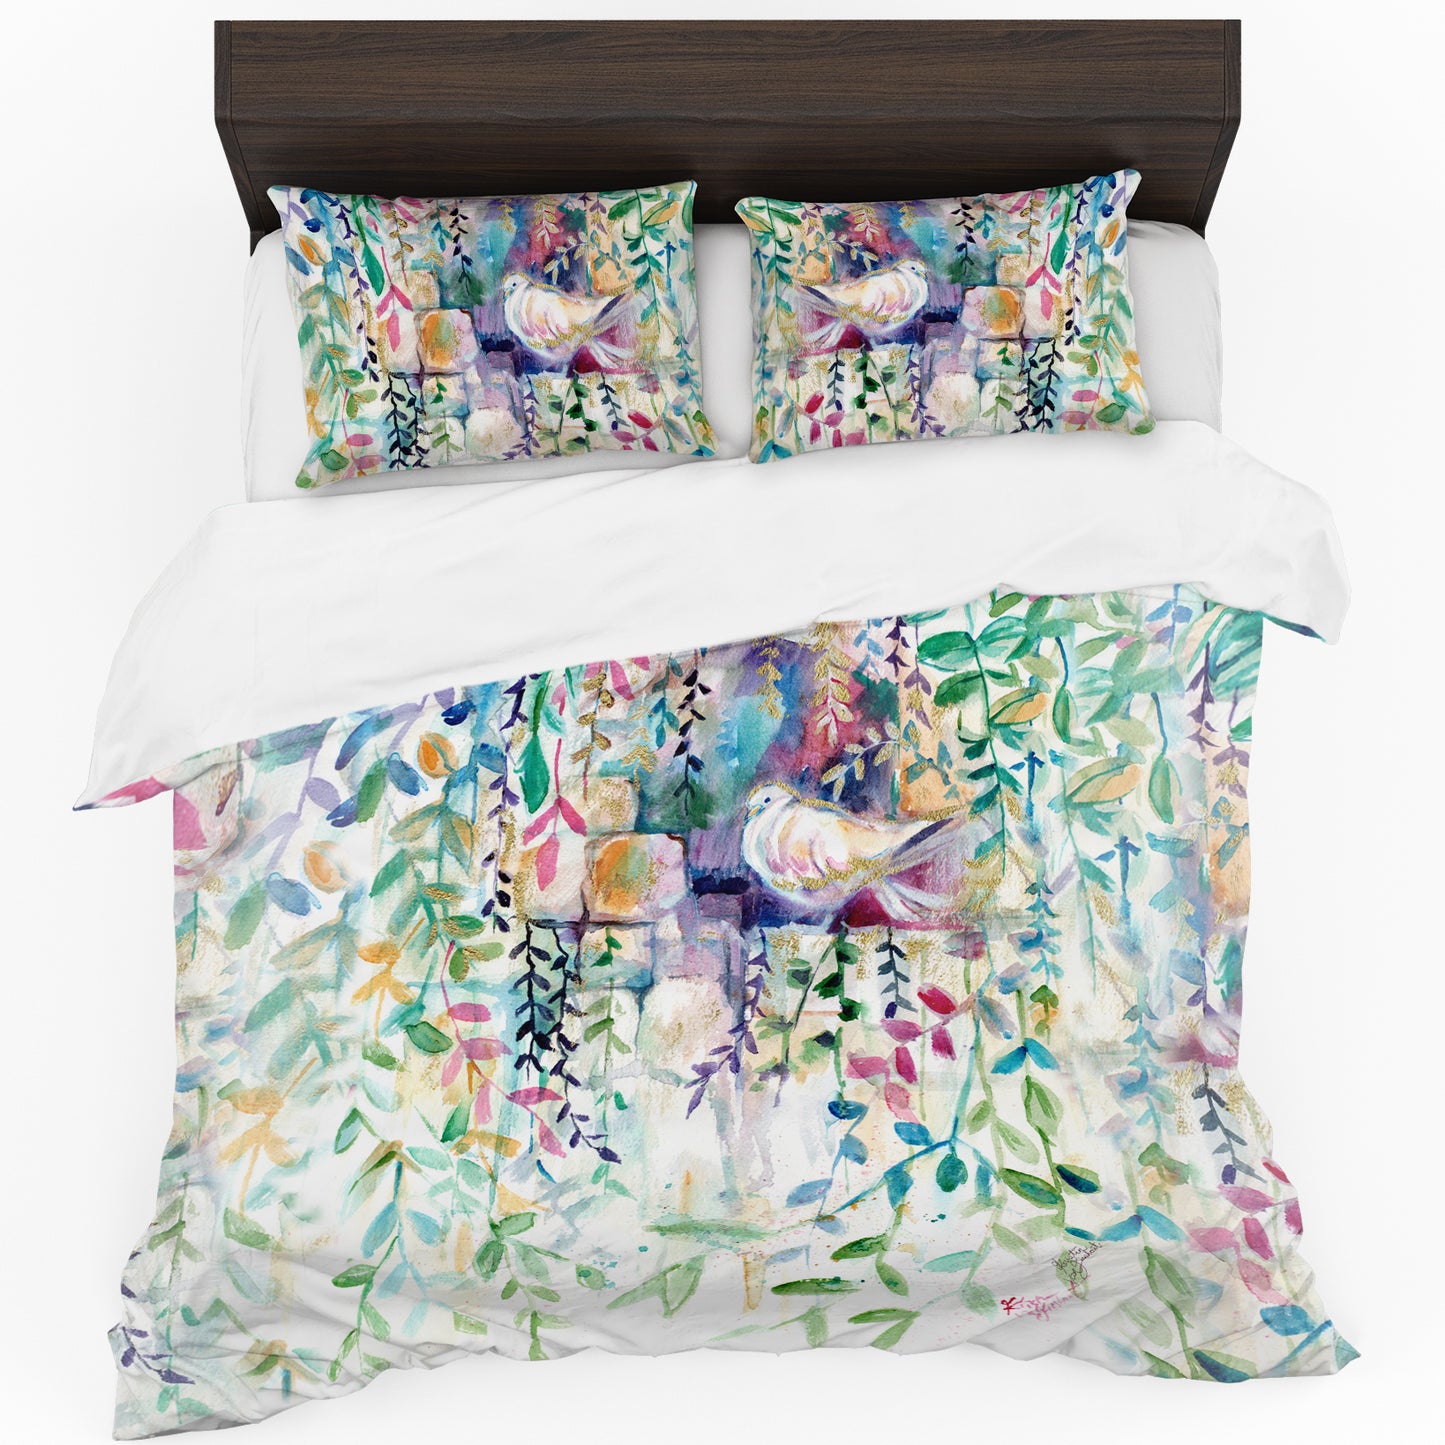 Dove on a Floral Wall Duvet Cover Set By Kristin Van Lieshout